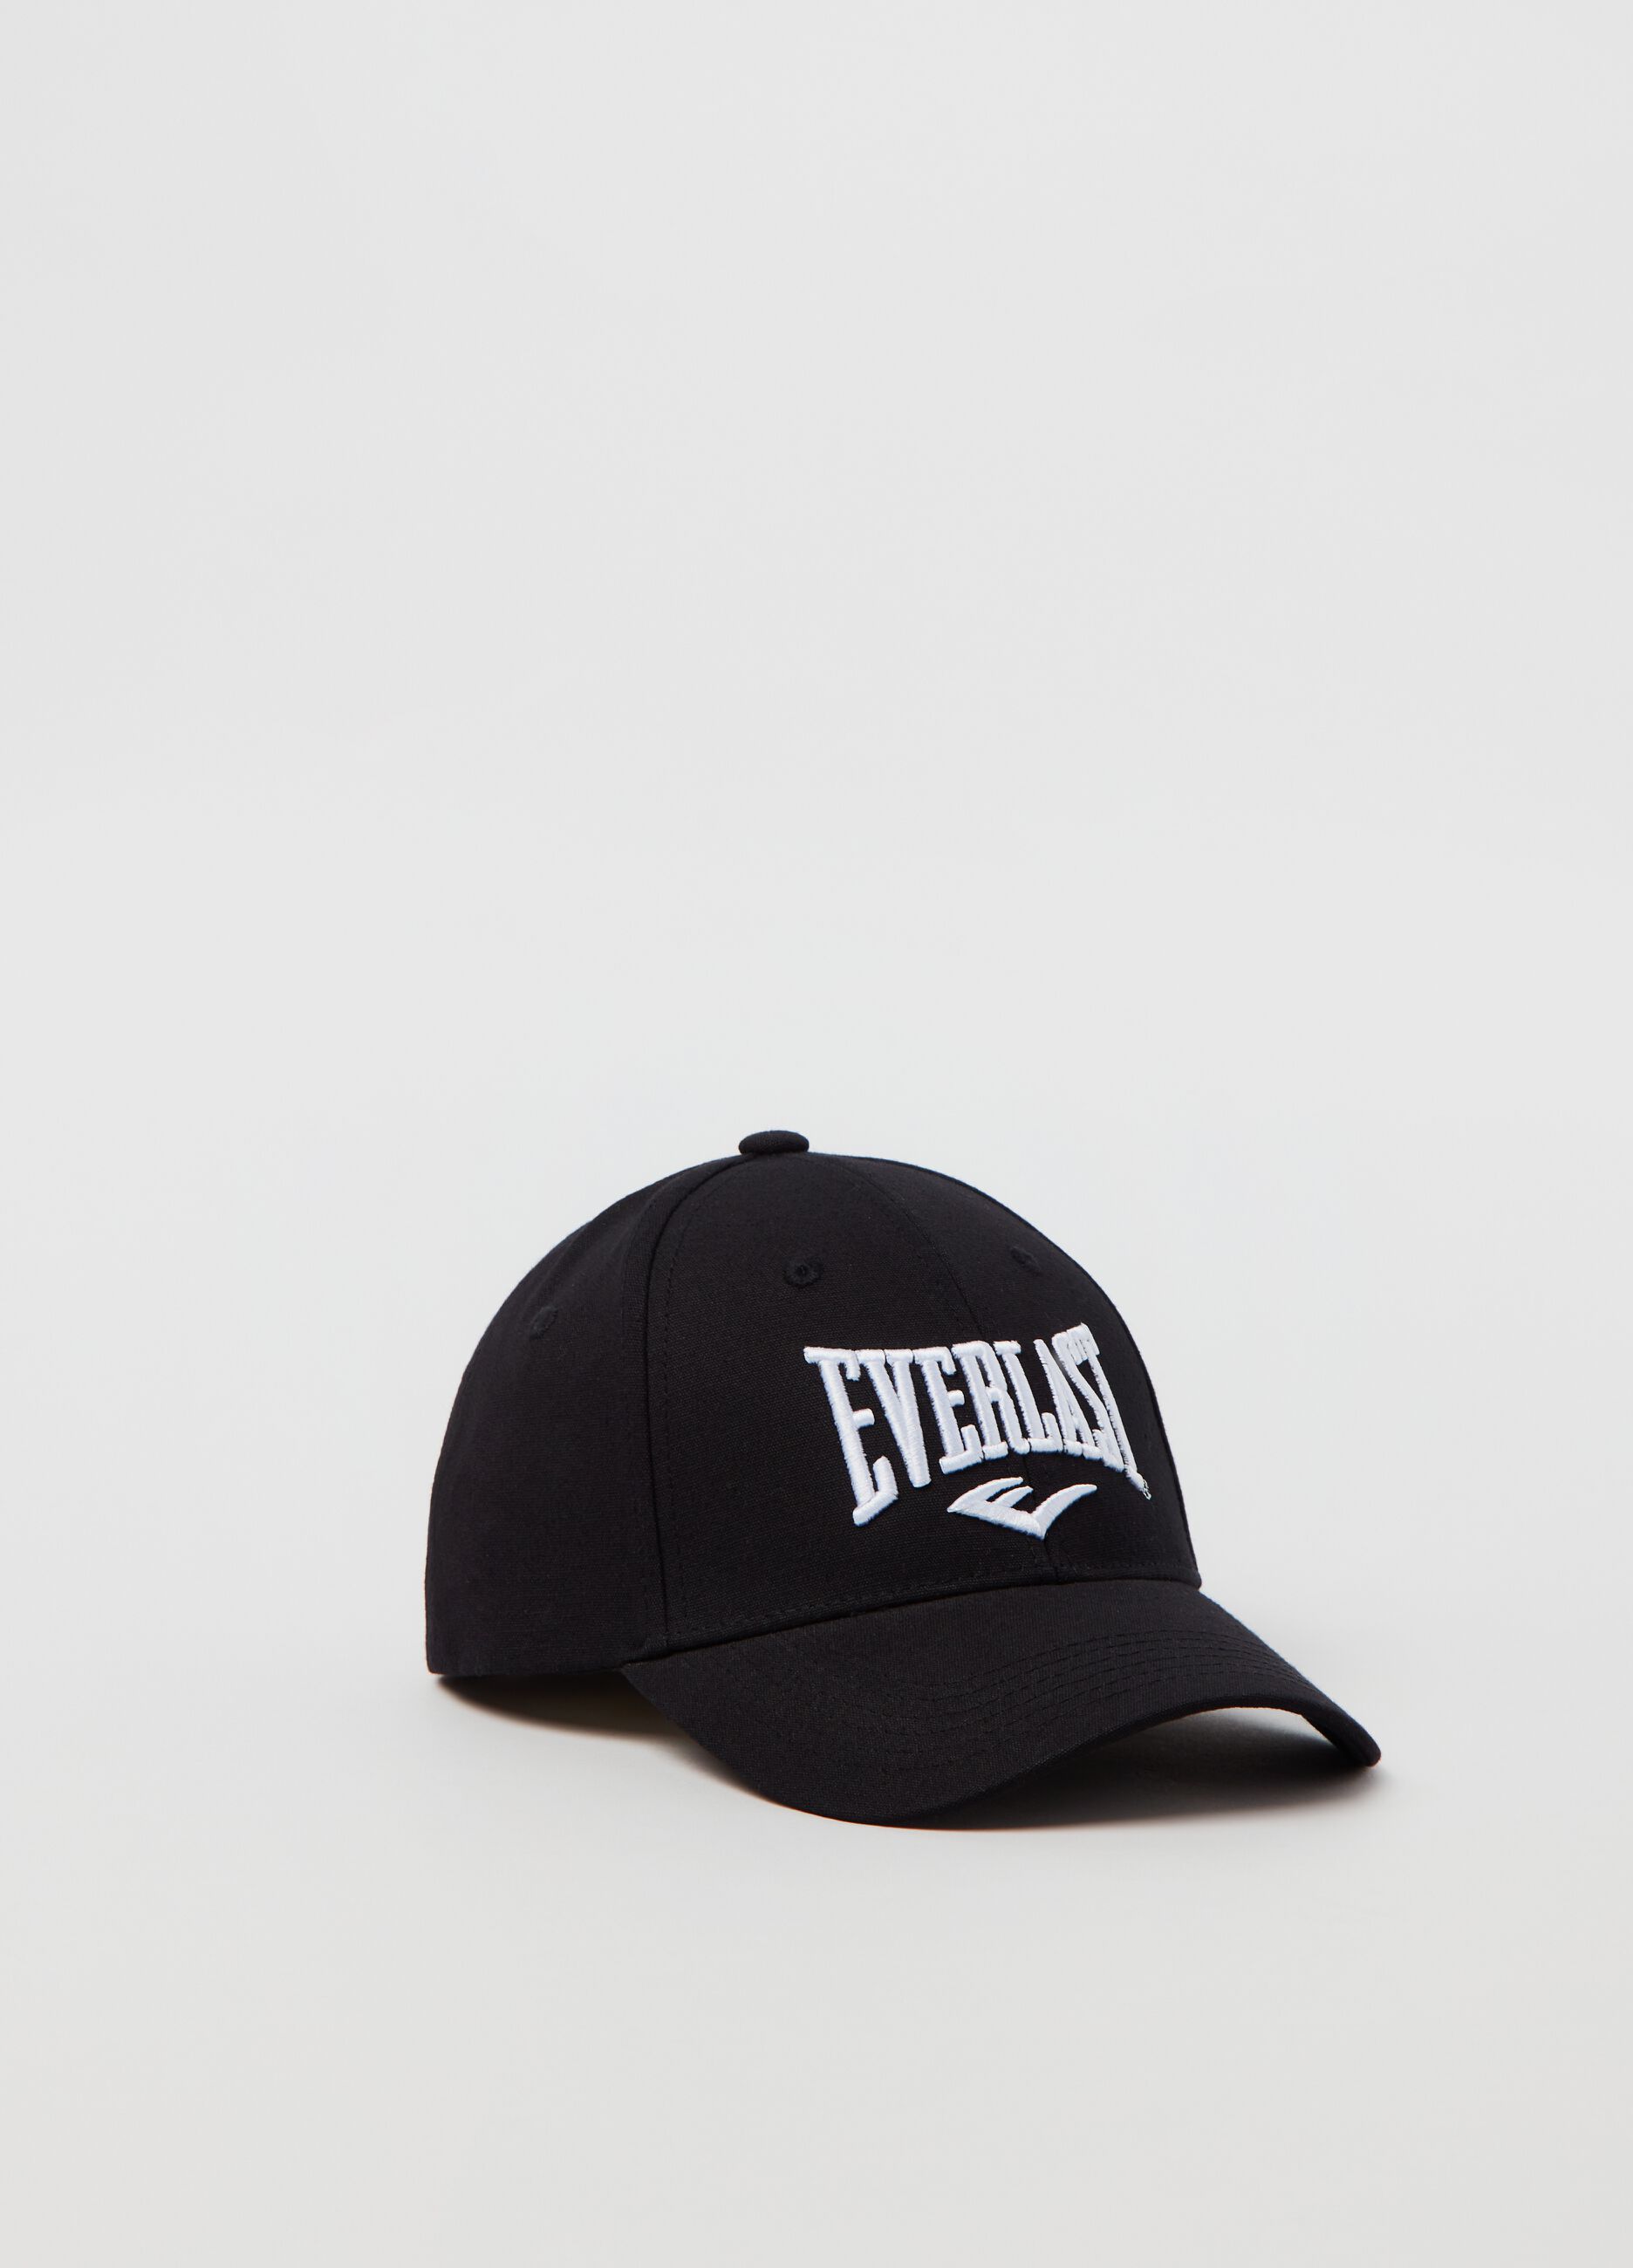 Baseball cap with Everlast embroidery.